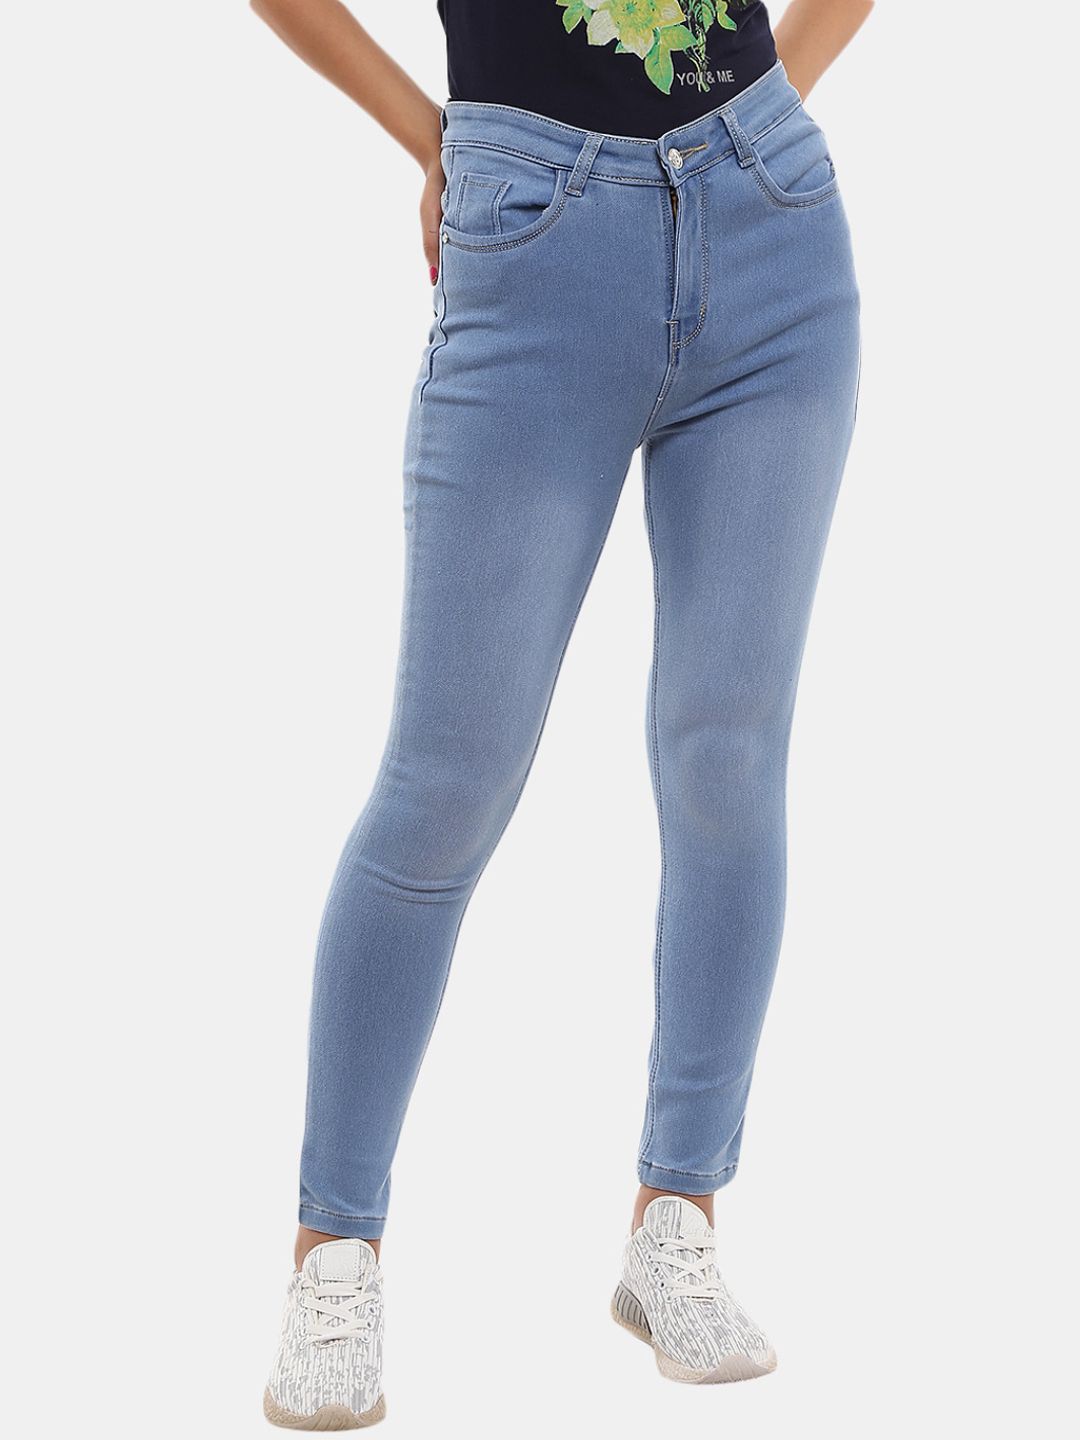 V-Mart Women Blue Stretchable Jeans Price in India